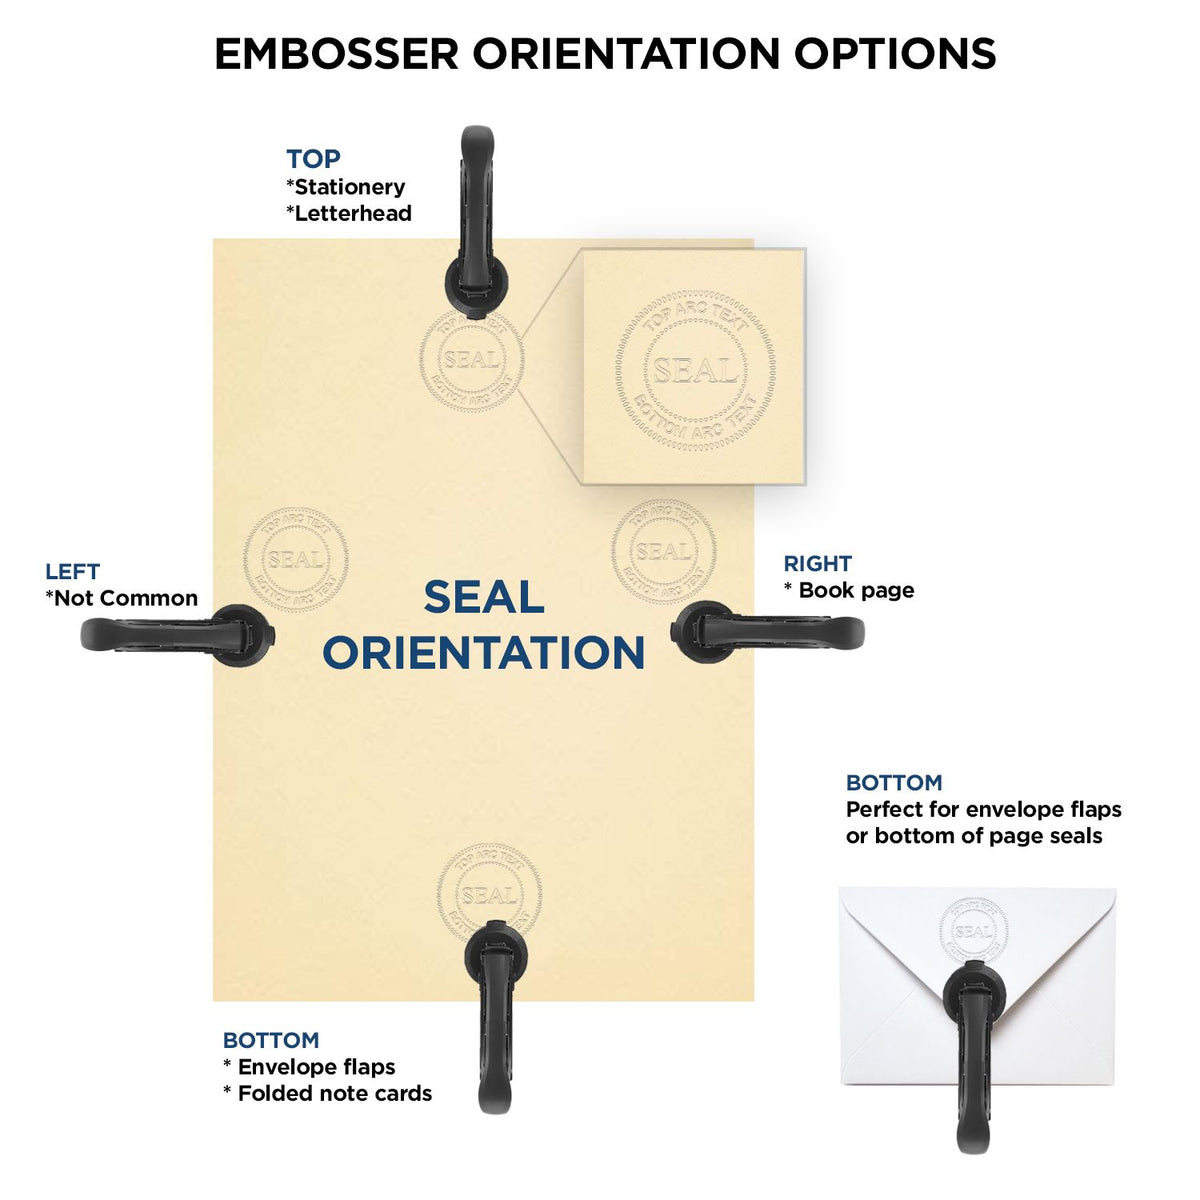 An infographic for the Heavy Duty Cast Iron Iowa Geologist Seal Embosser showing embosser orientation, this is showing examples of a top, bottom, right and left insert.